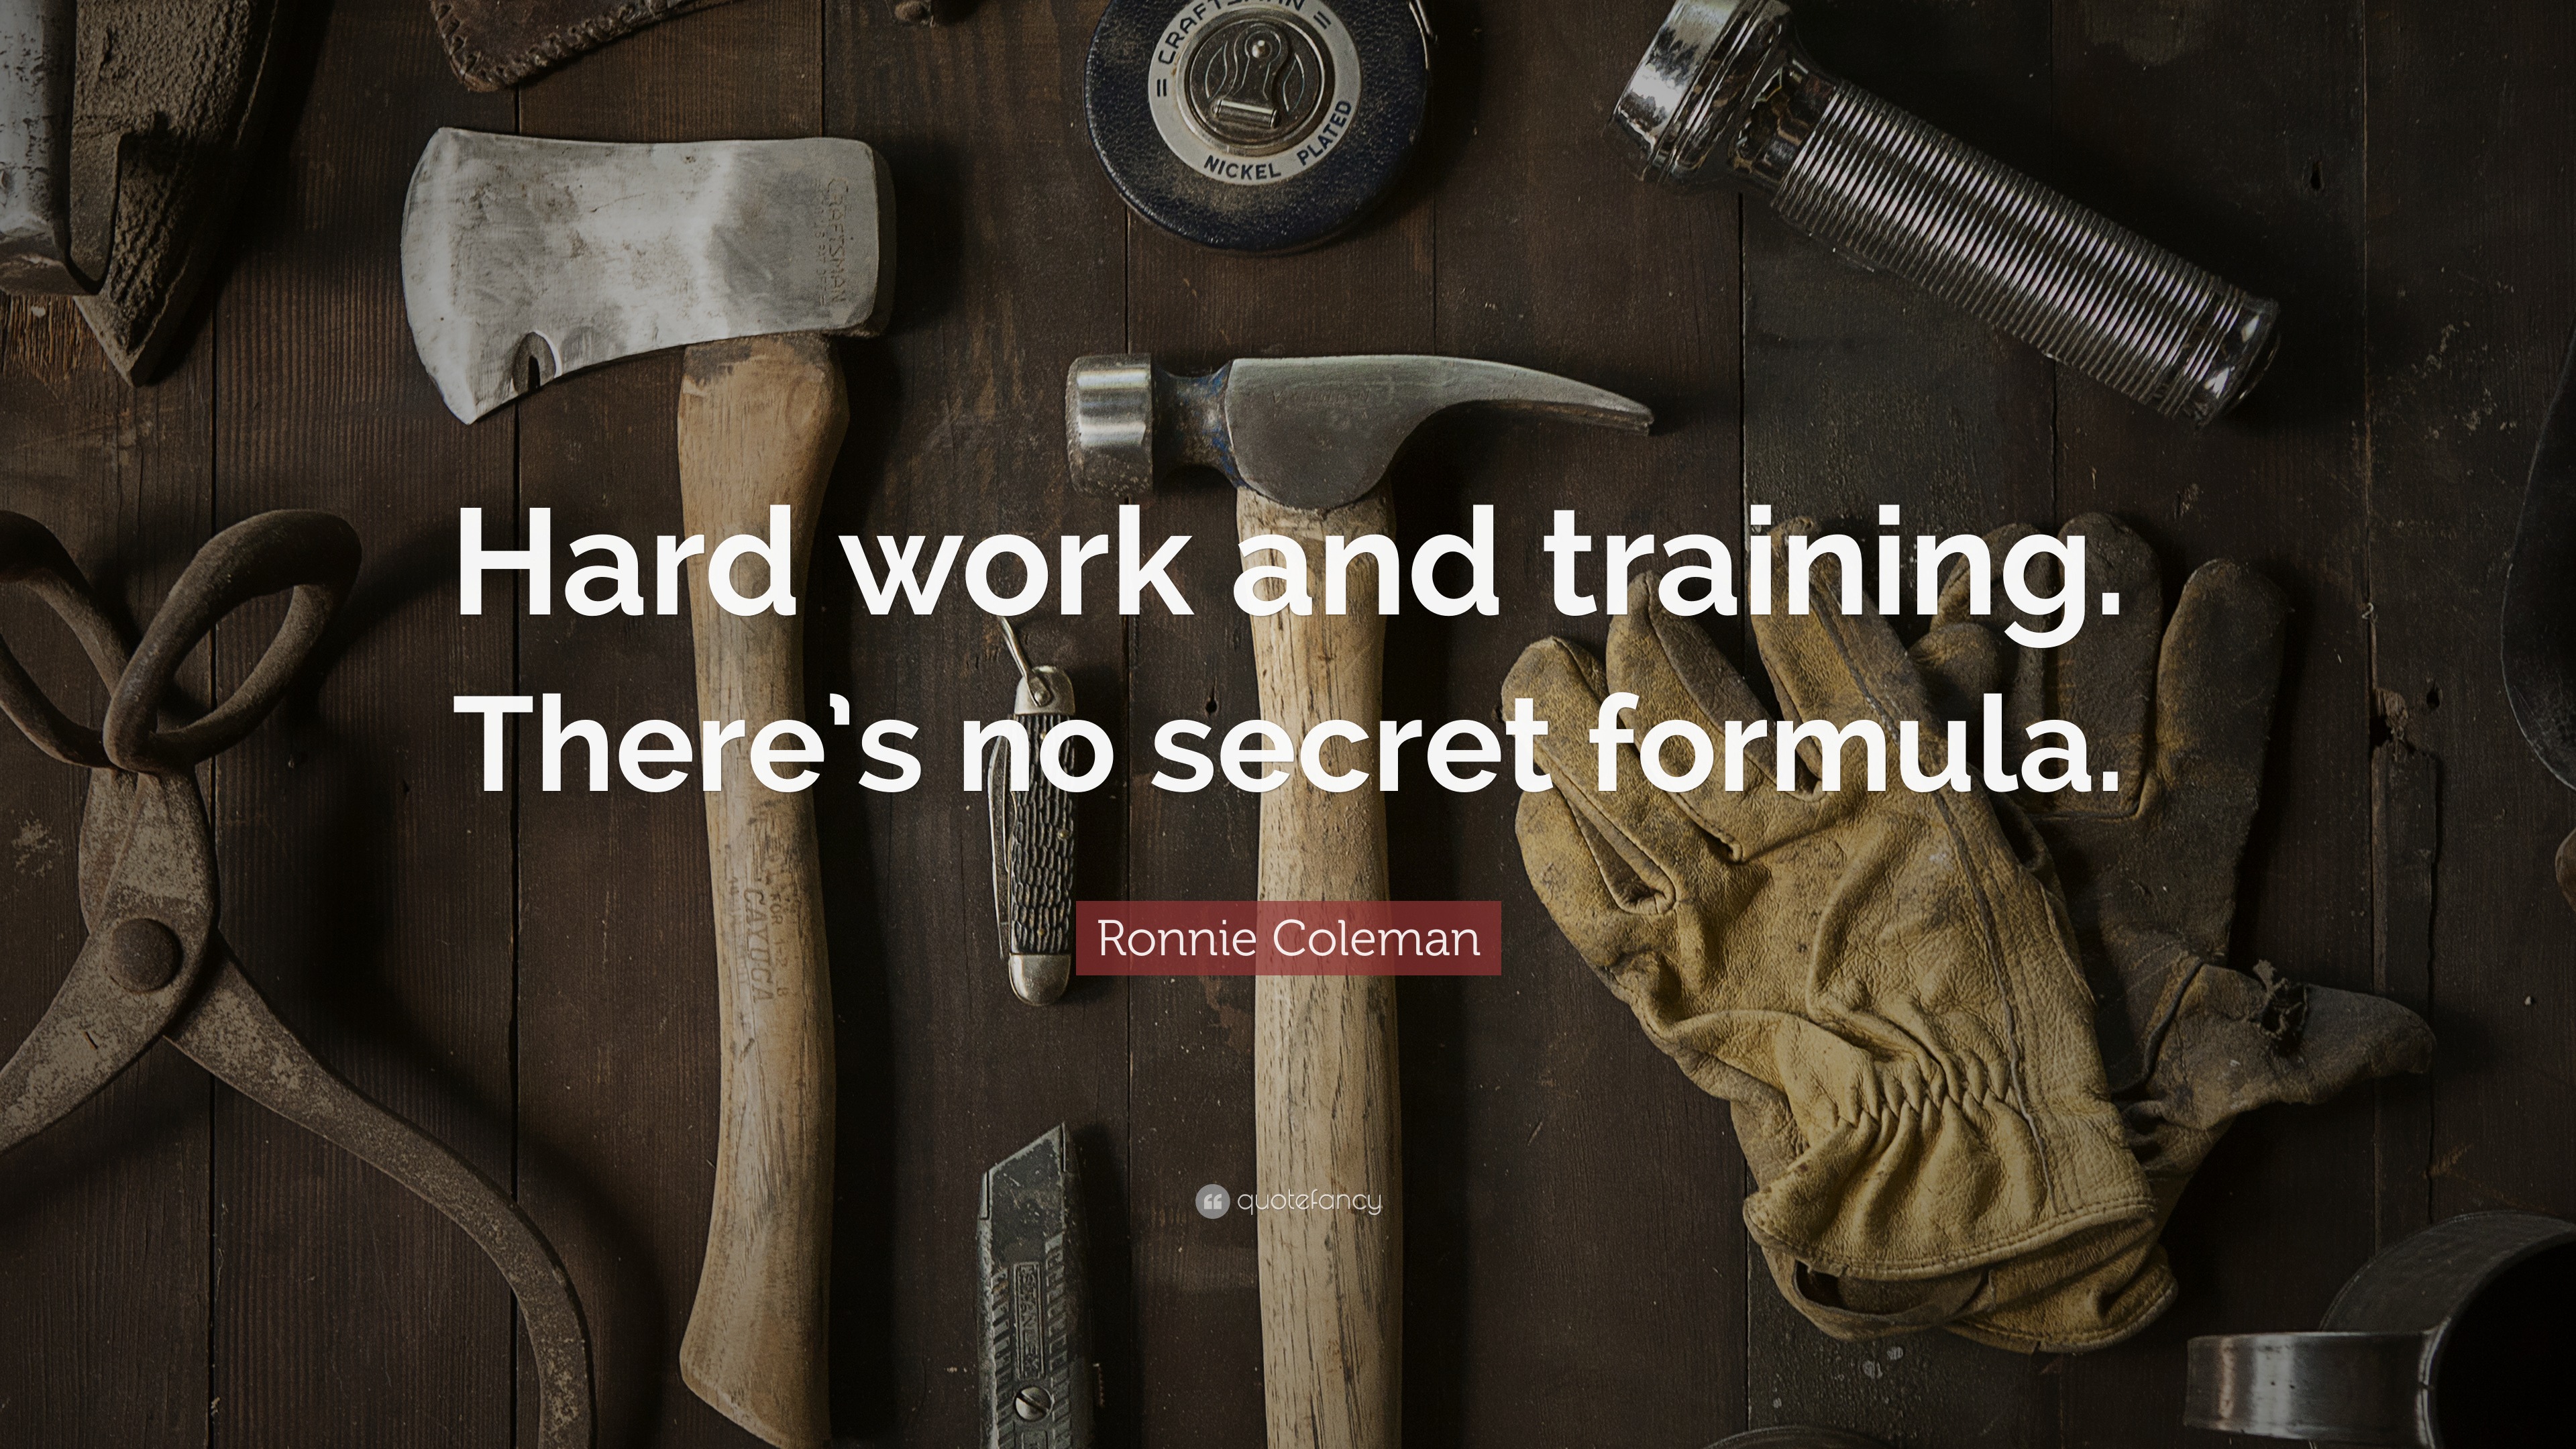 Ronnie Coleman Quote: "Hard work and training. There's no secret formula." (12 wallpapers ...